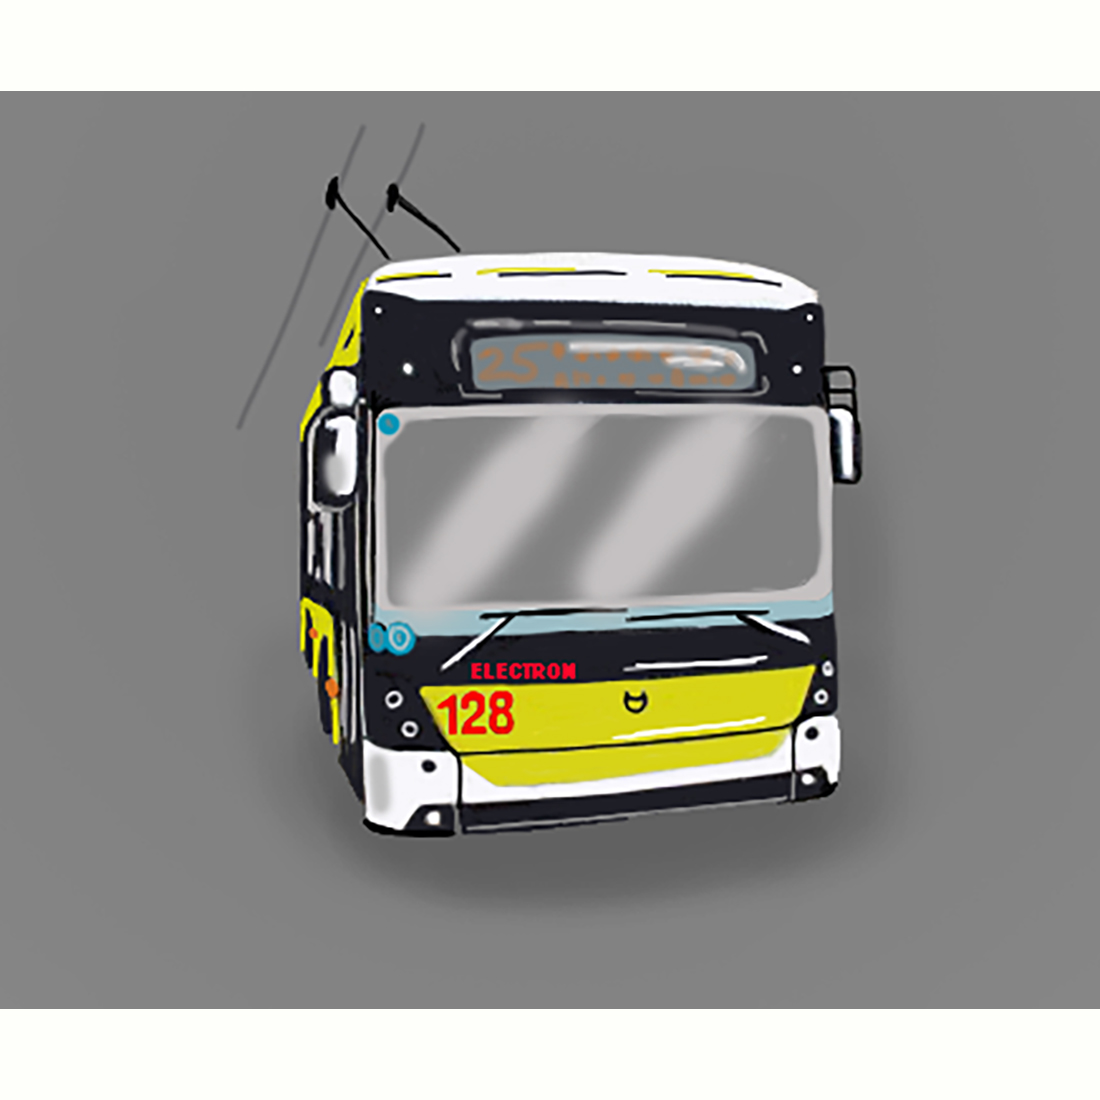 Trolleybus cover image.